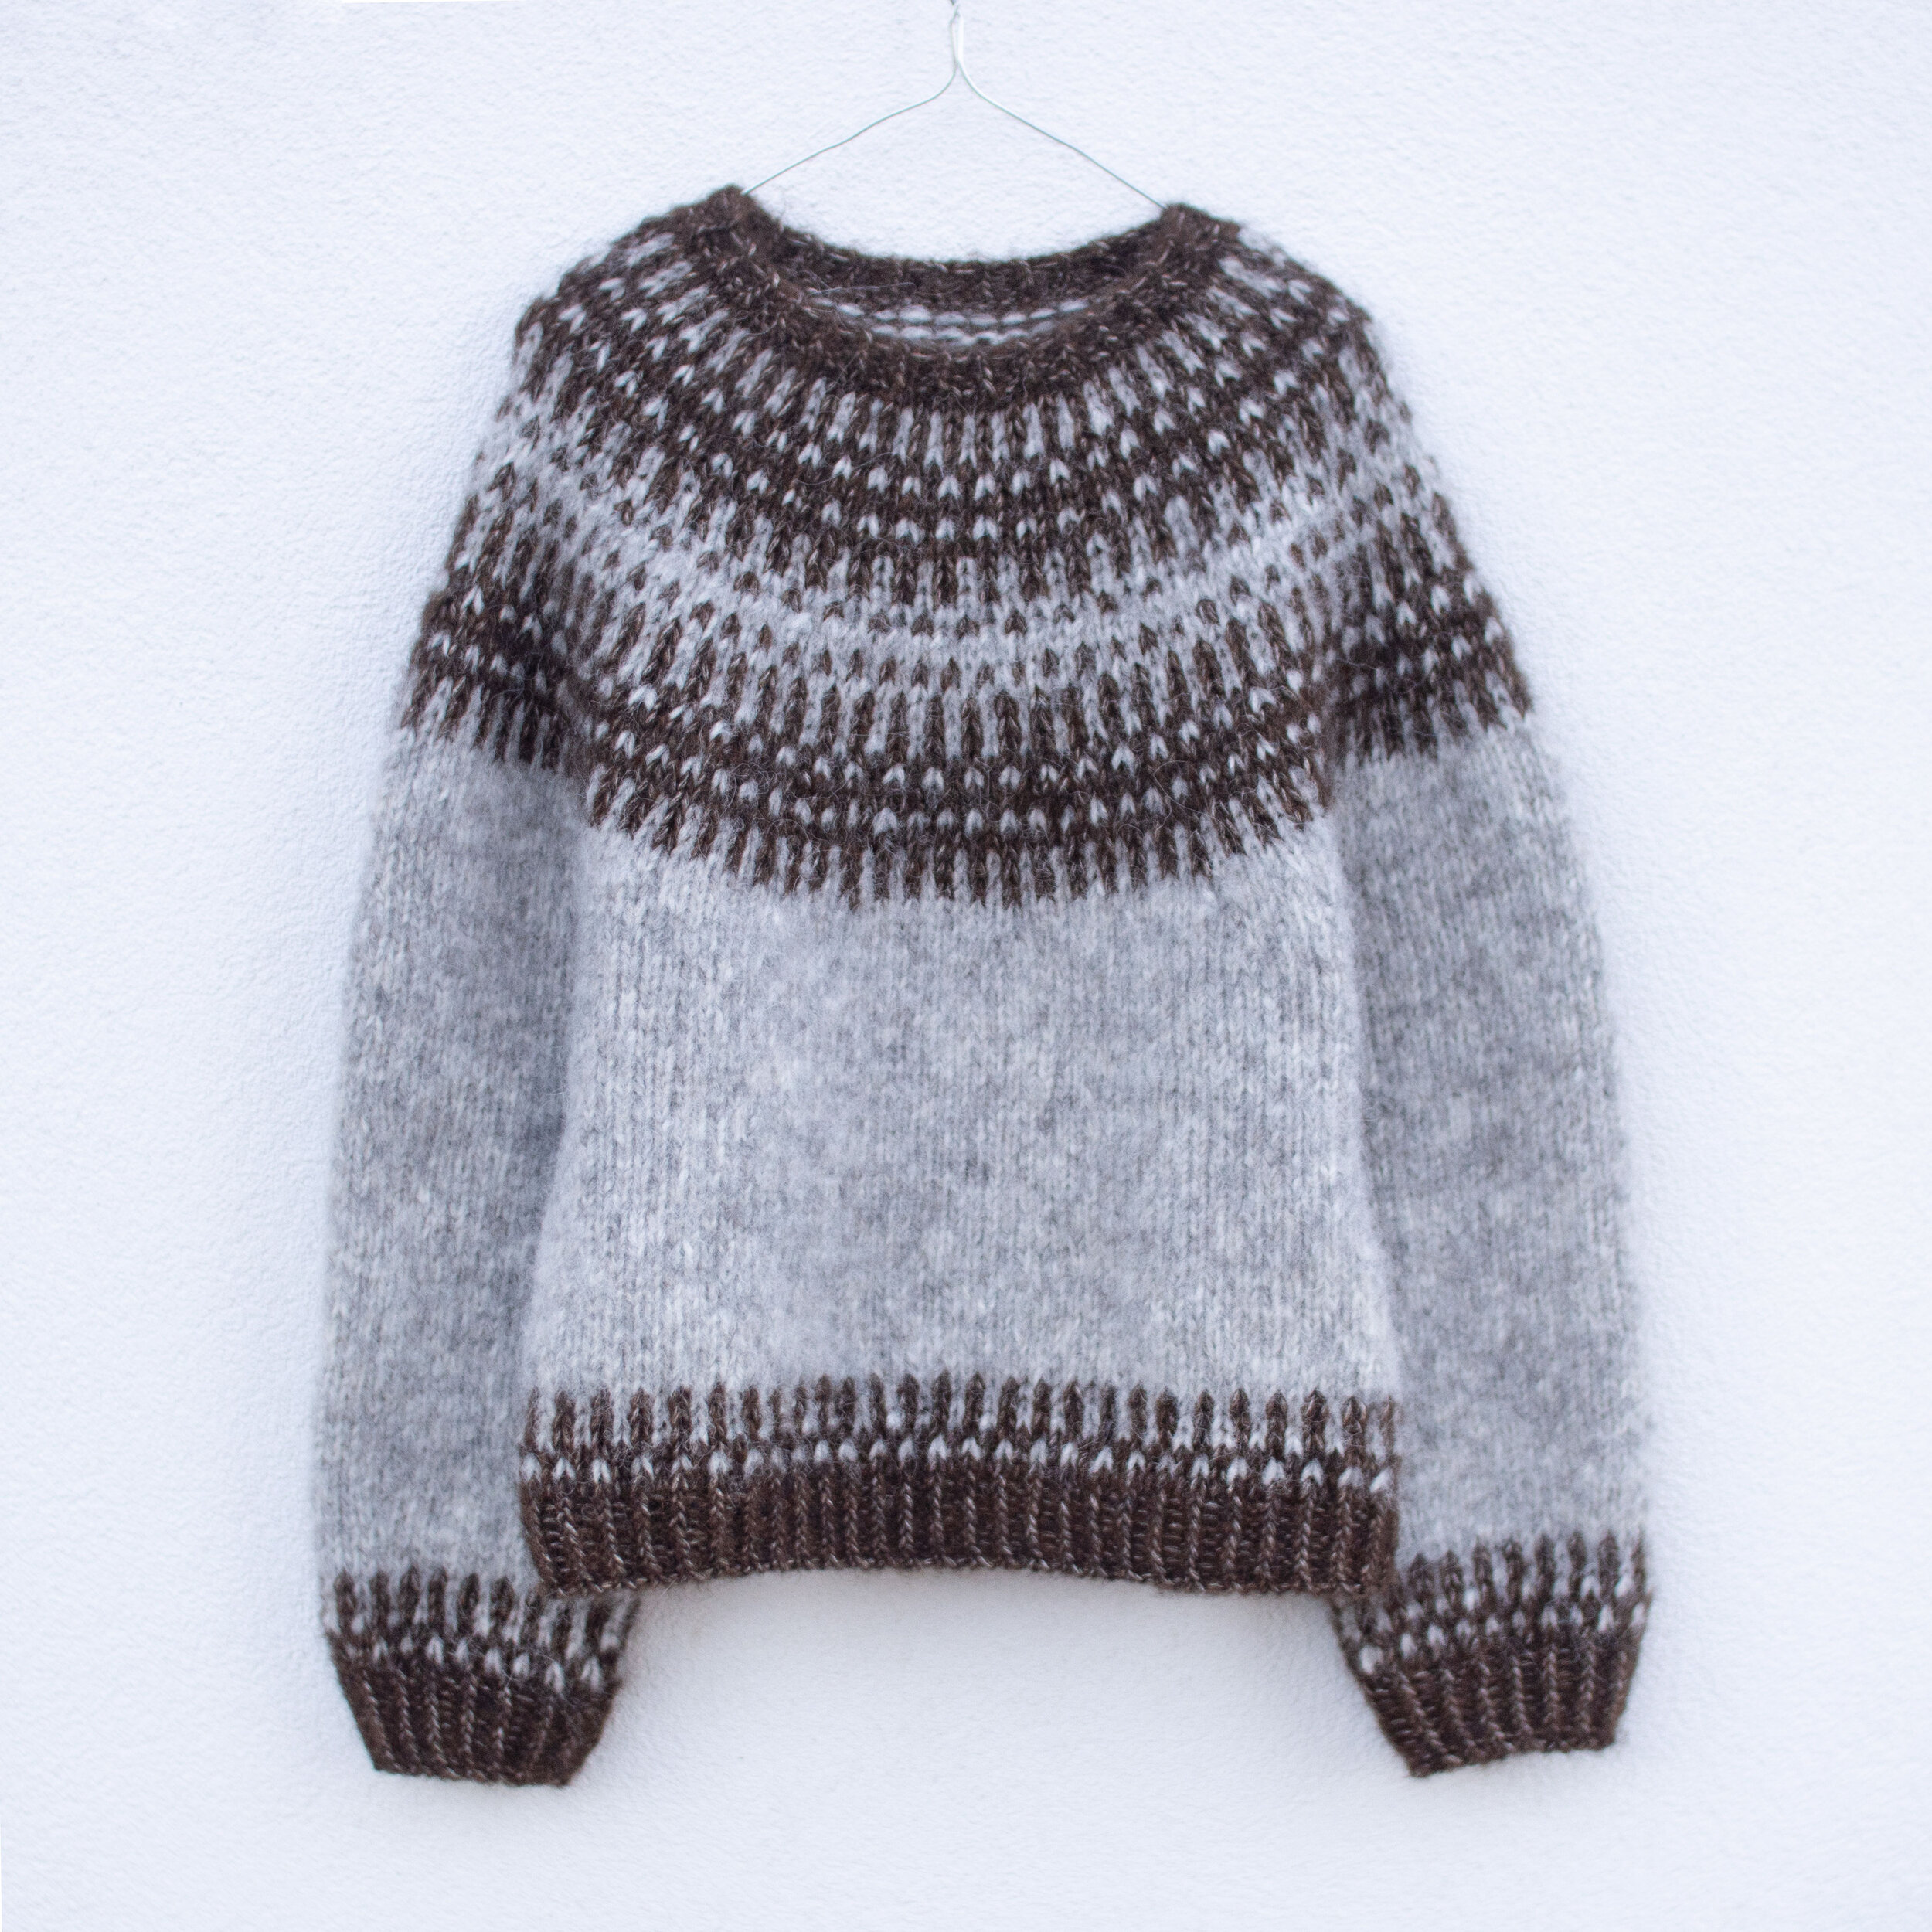 BADGER SWEATER is a soft and warm sweater that is worked from the top down.  — Anne Ventzel